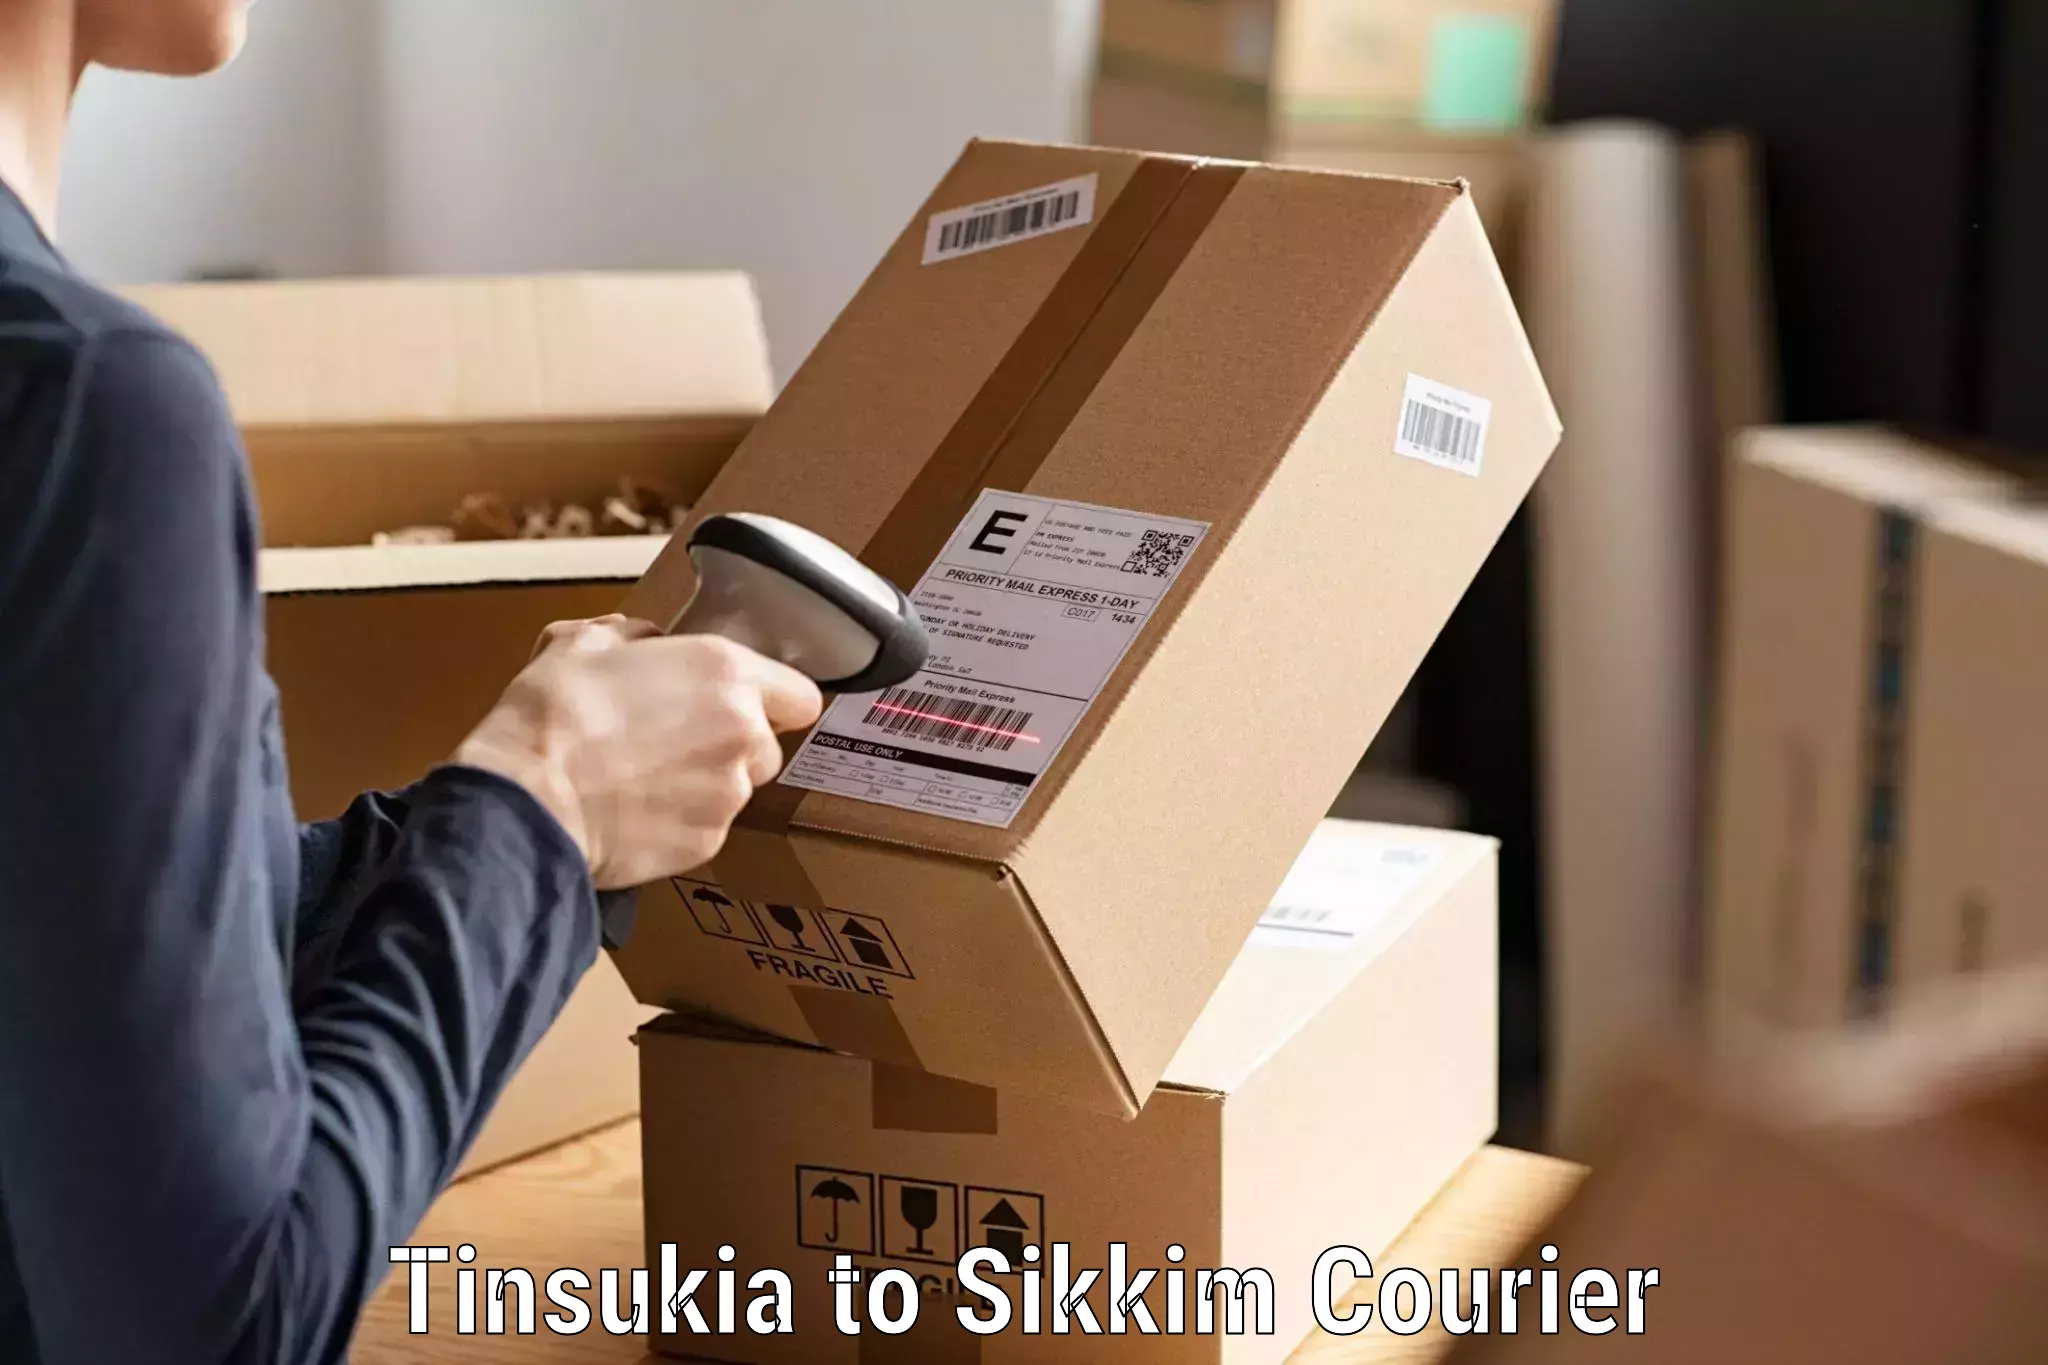 Fast delivery service Tinsukia to Sikkim